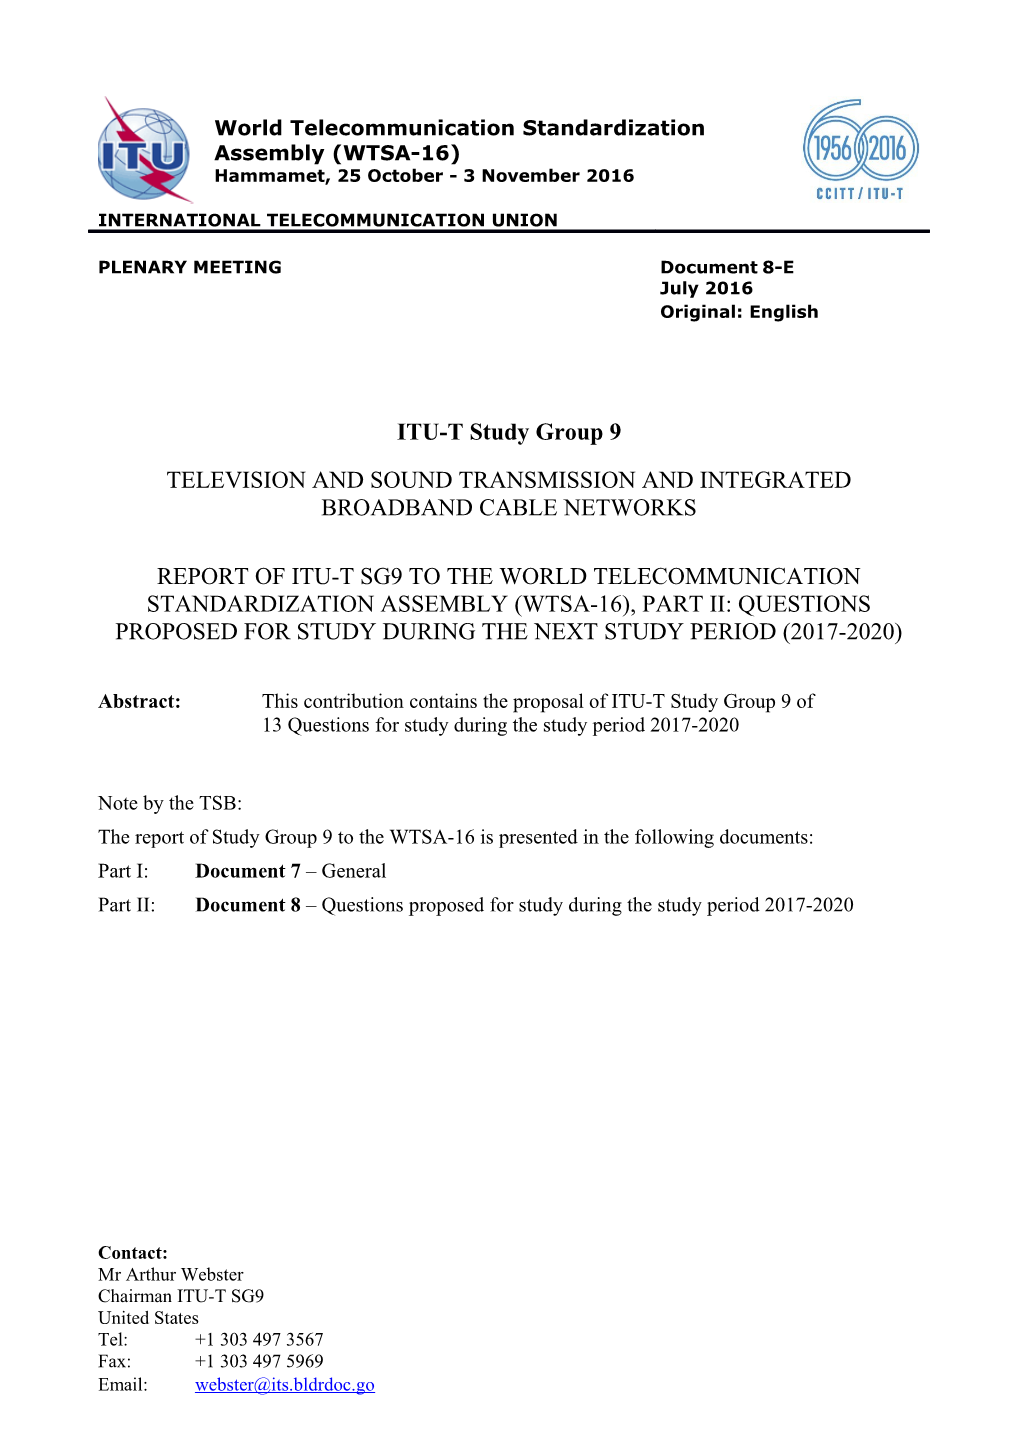 The Report of Study Group 9 to the WTSA-16 Is Presented in the Following Documents